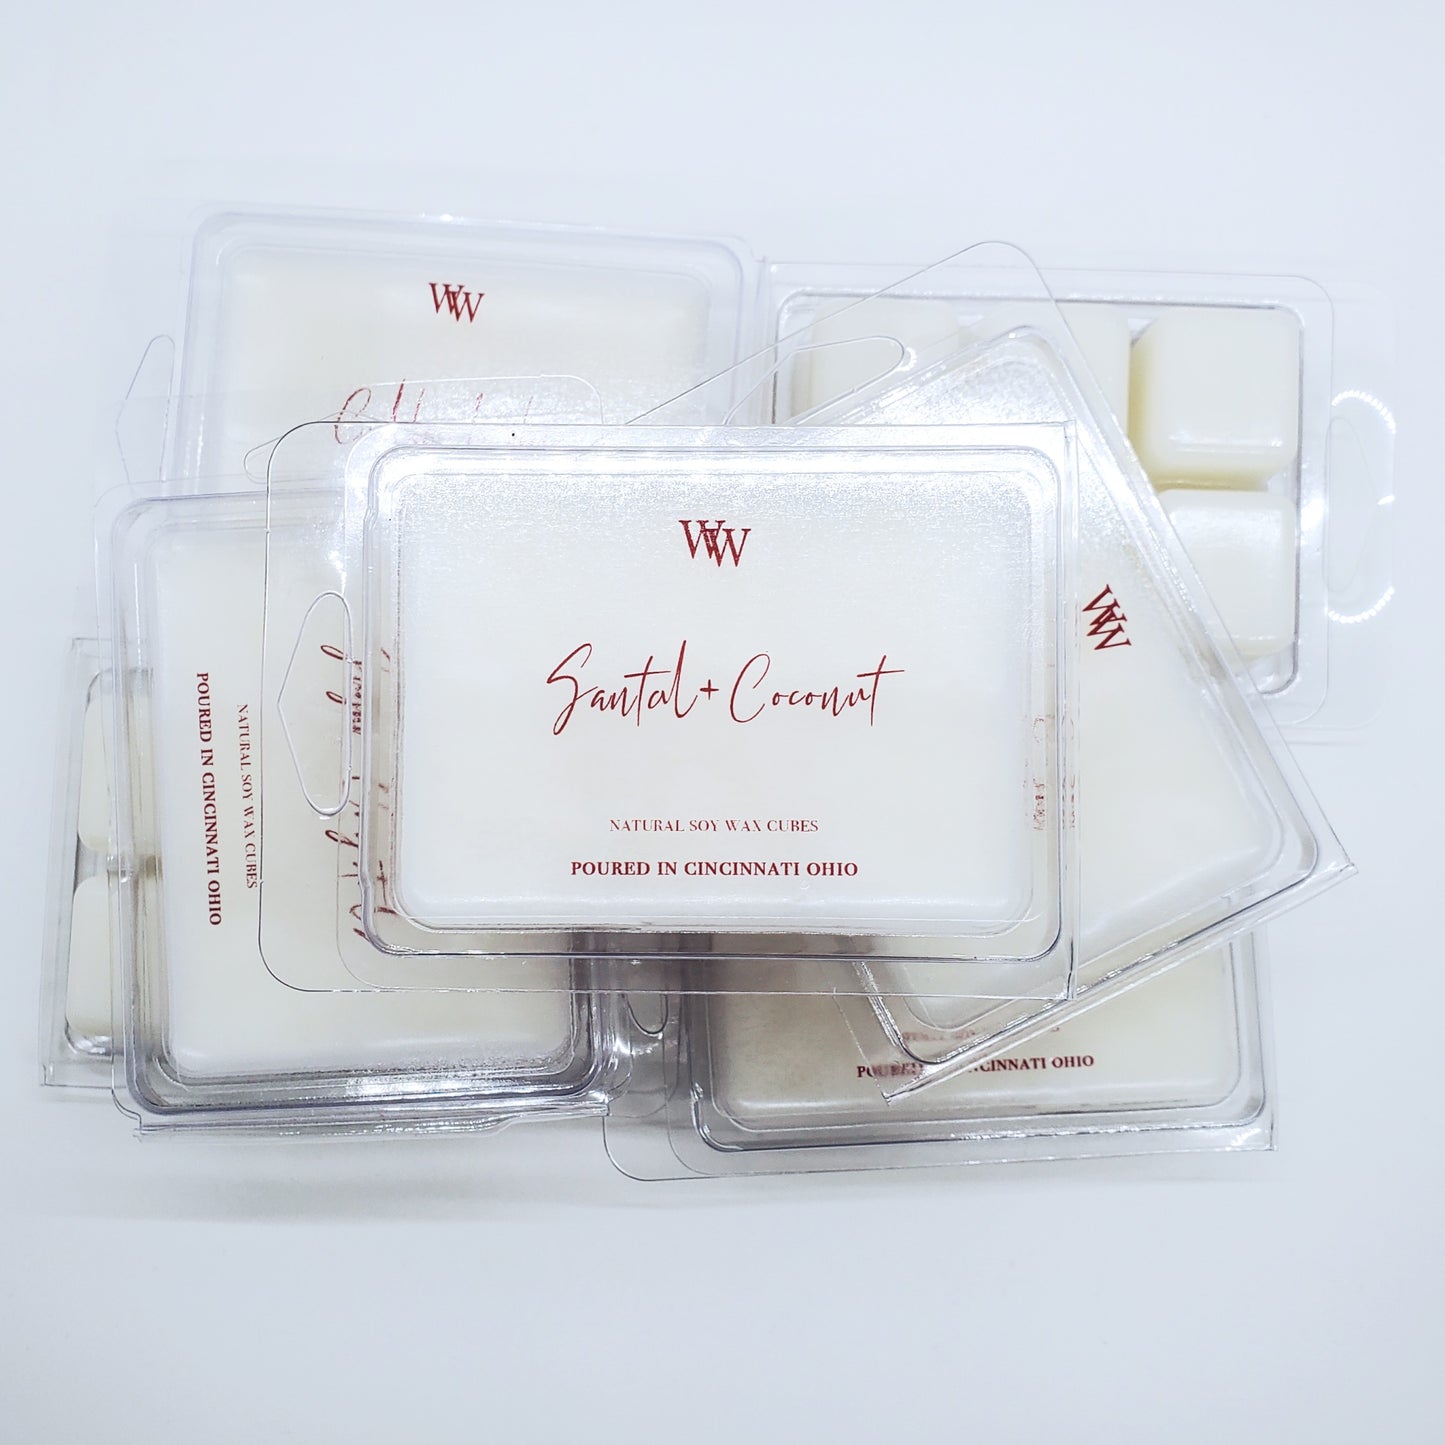 Santal + Coconut Highly Scented Soy Wax Melts